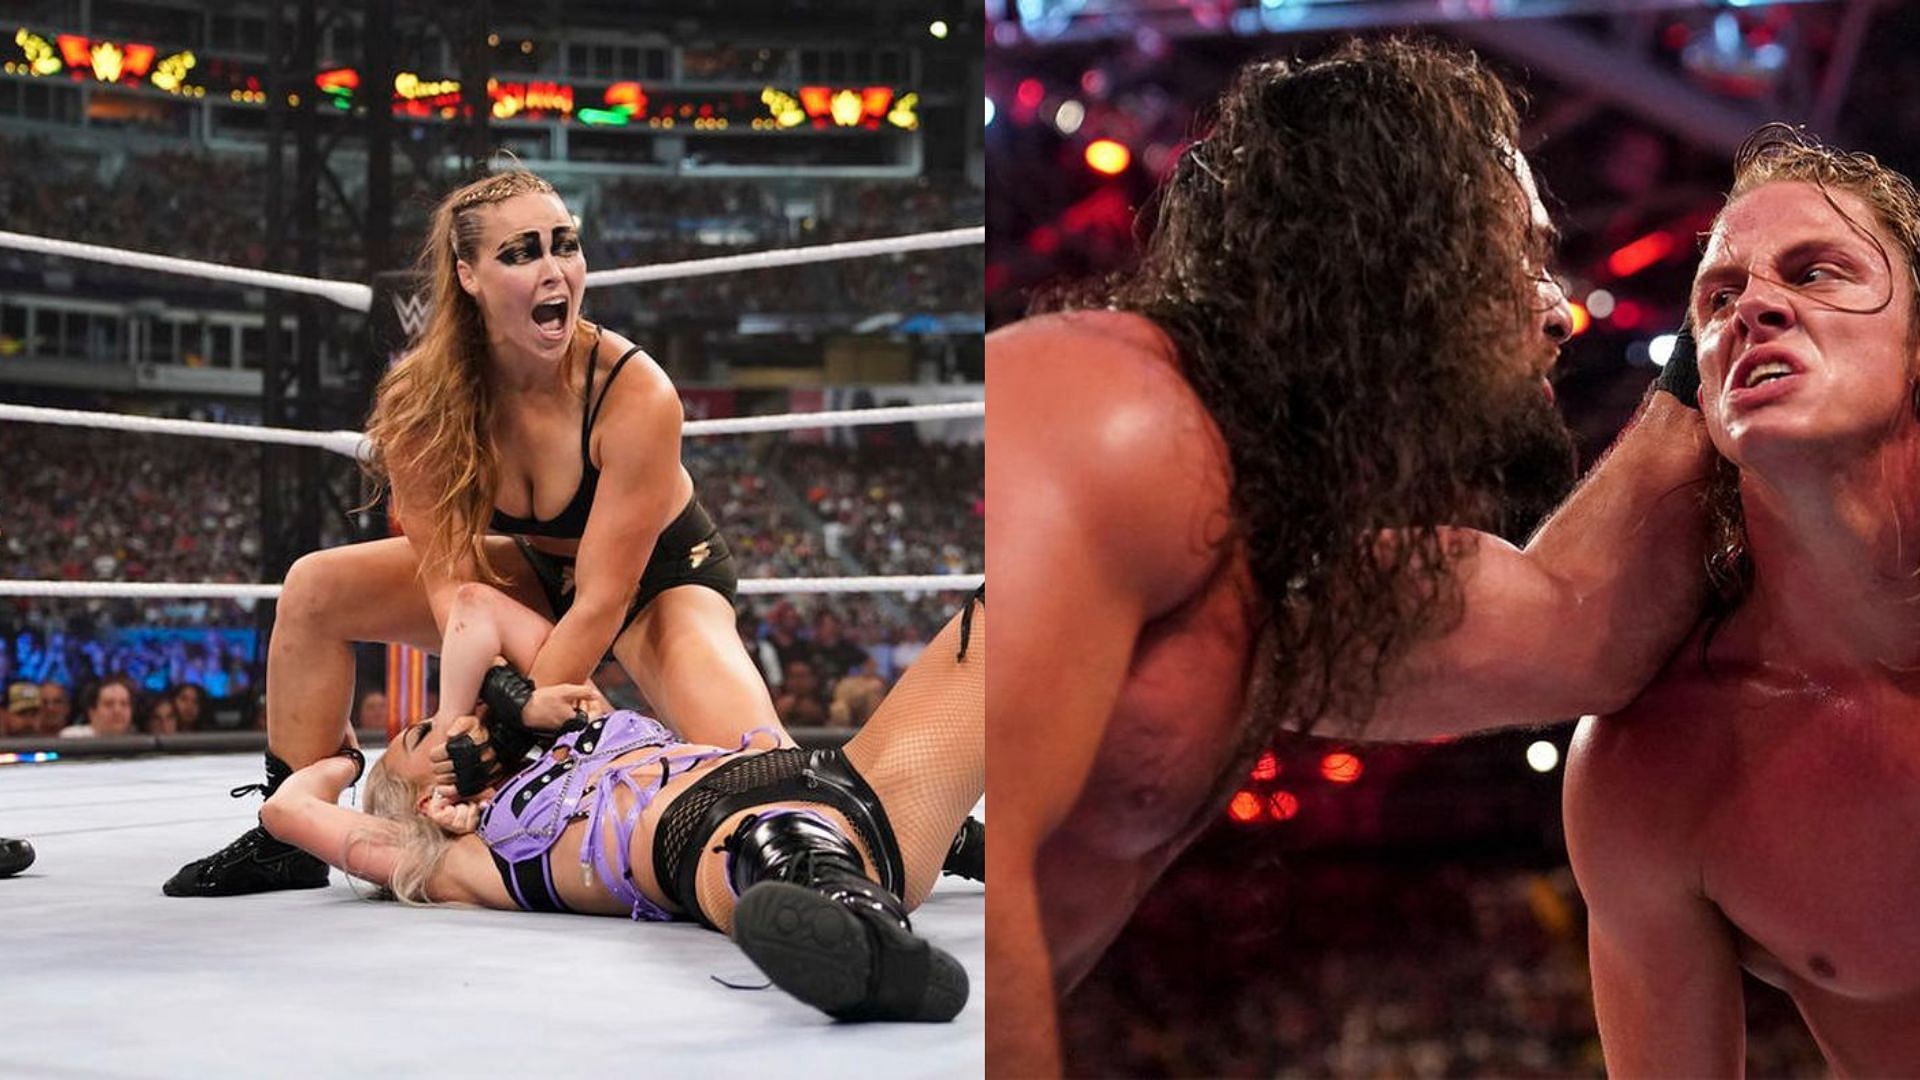 There are several blockbuster matches that could main event WWE Extreme Rules.